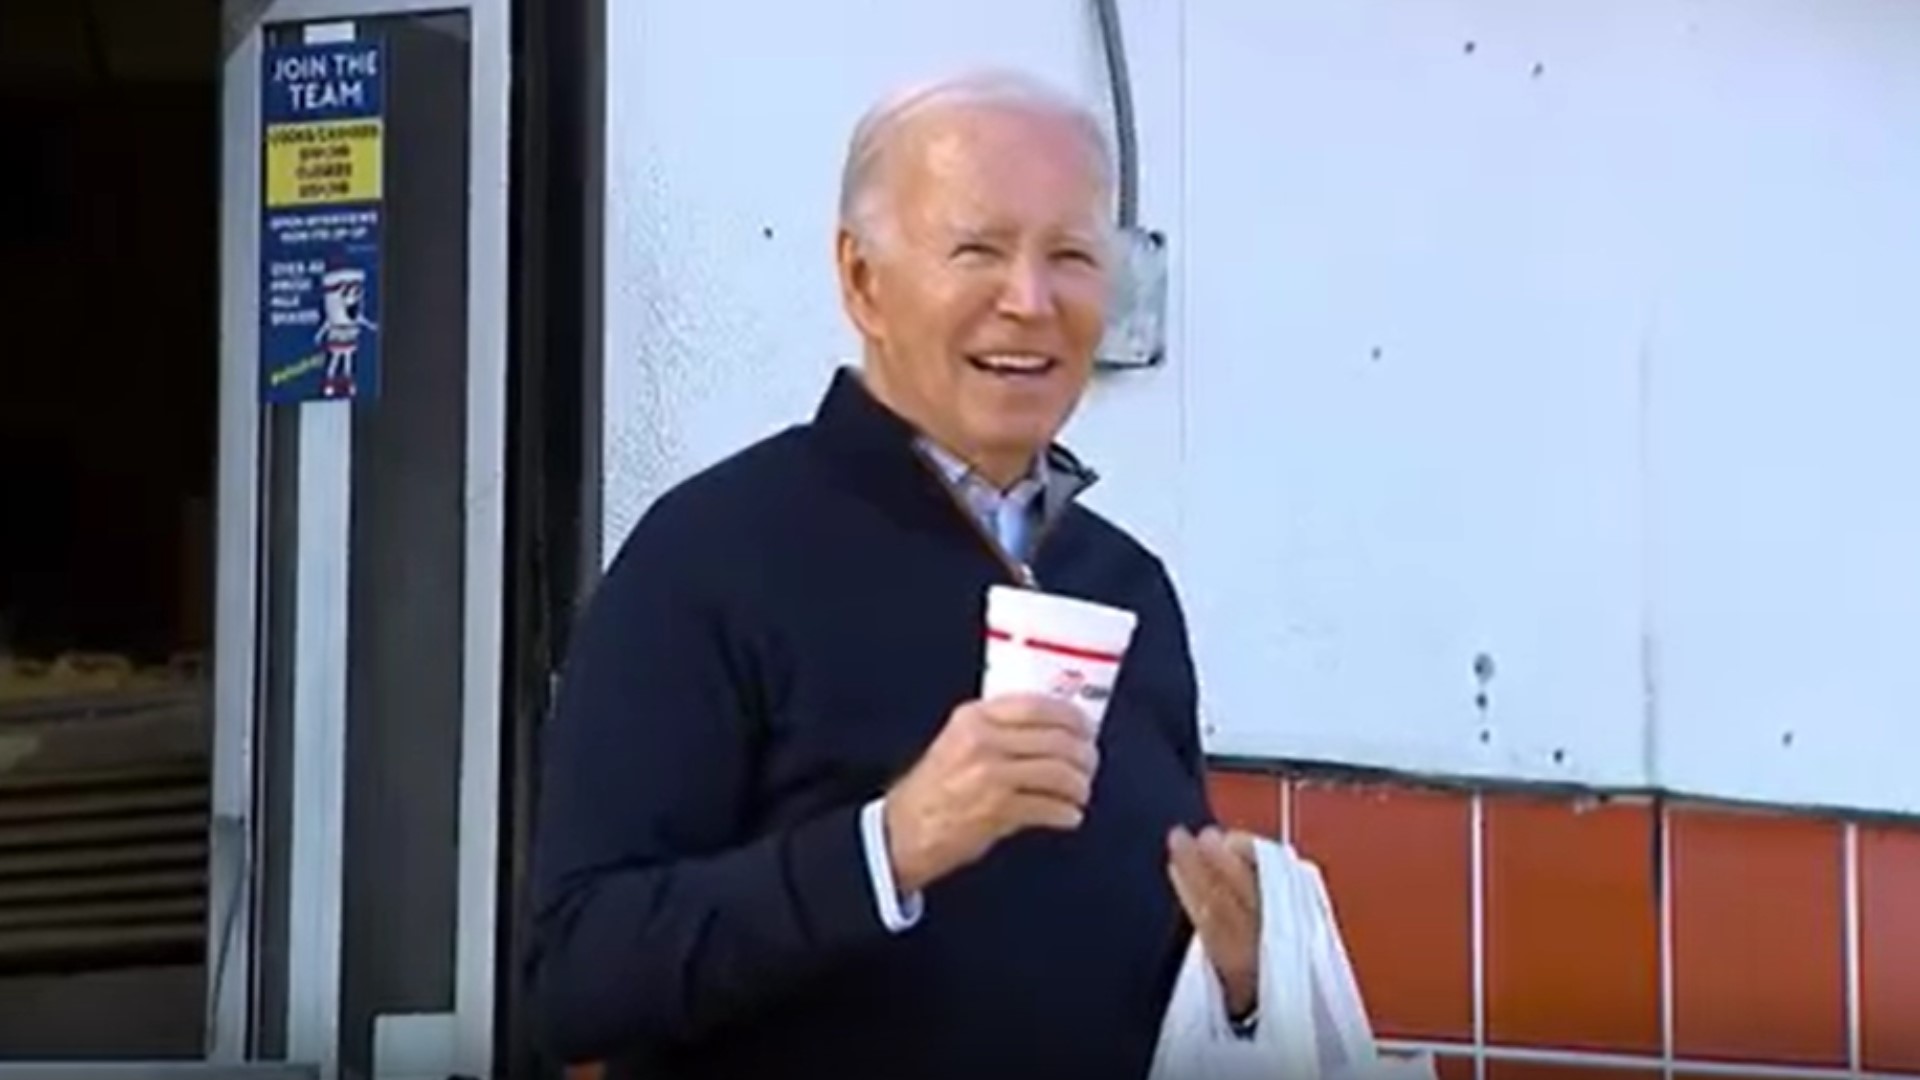 President Biden stopped by a North Carolina fast food staple during his visit to the state - Cook Out! He ordered a tray and a milkshake.